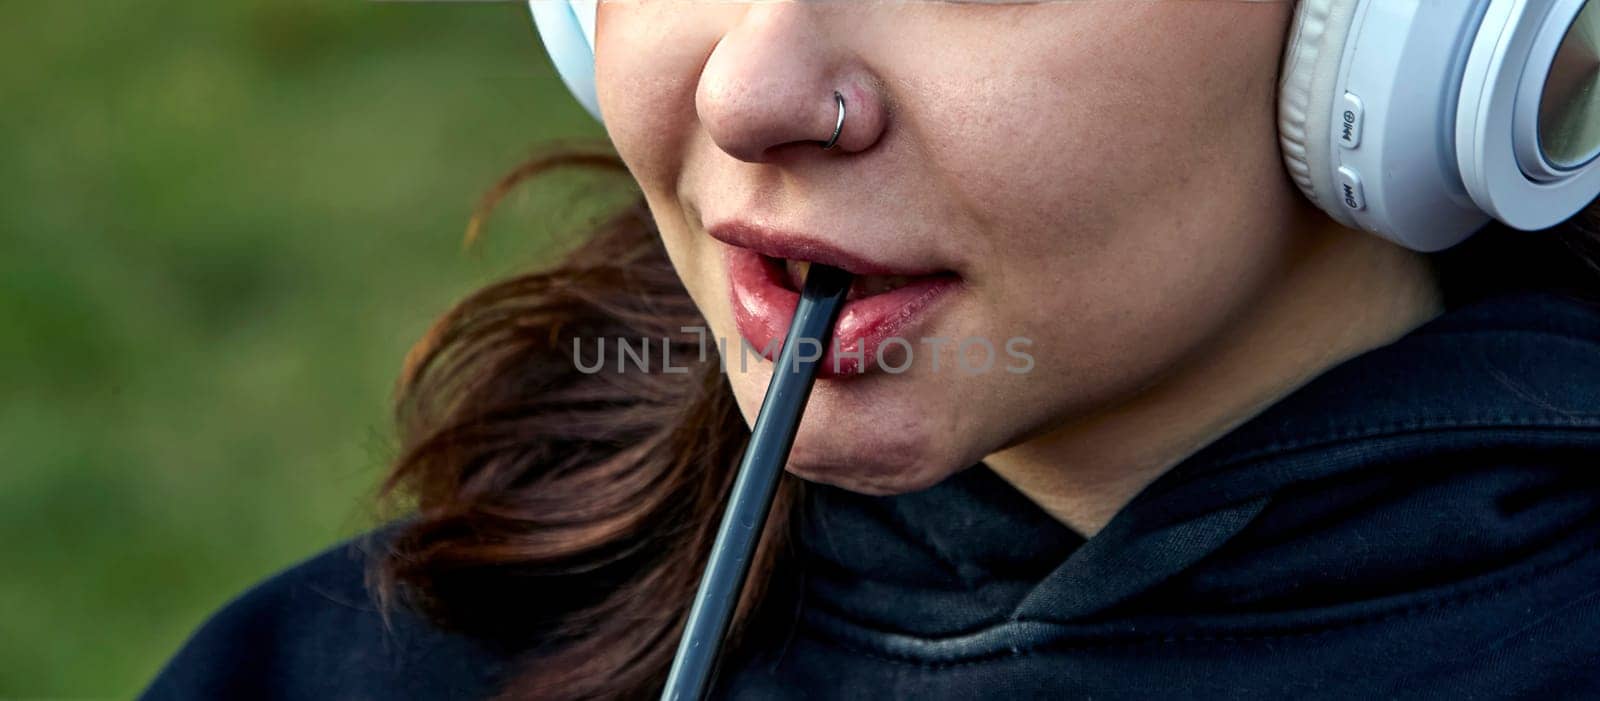 A close-up shot of a young woman wearing headphones, biting on a straw. Her face is relaxed, suggesting a moment of peace and quiet.